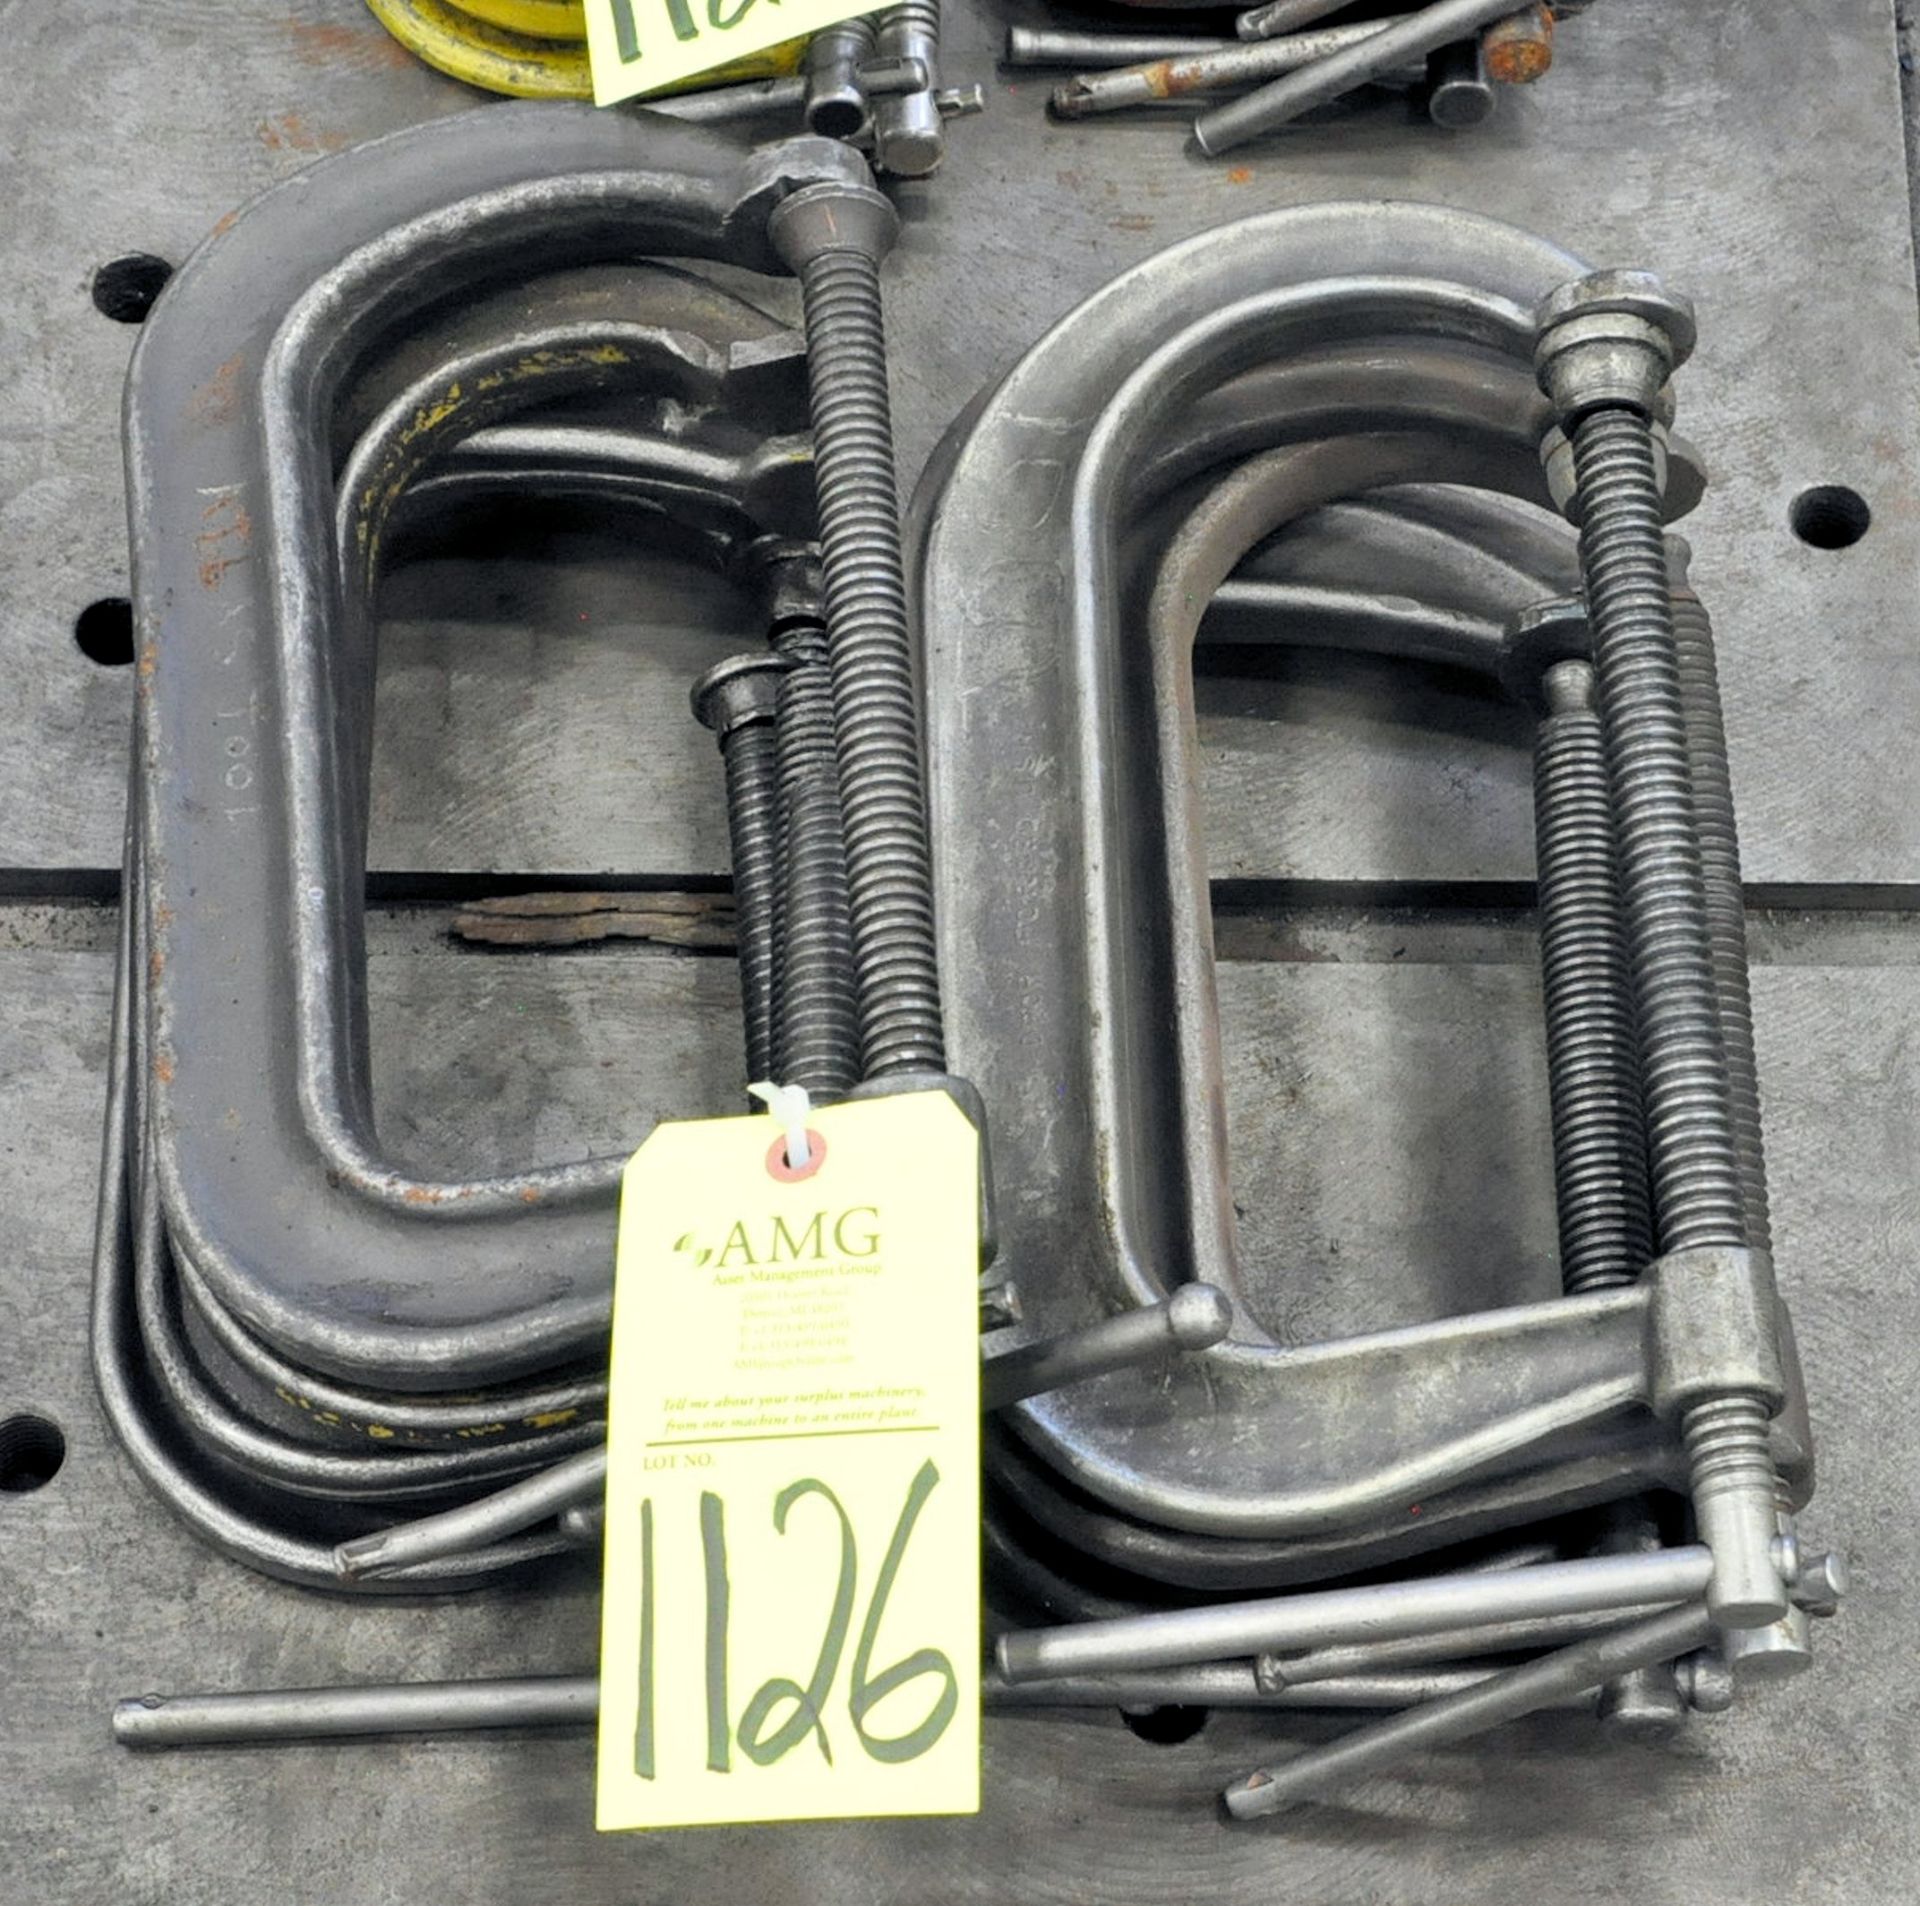 Lot-8" C-Clamps in (2) Stacks, (G-15), (Yellow Tag)